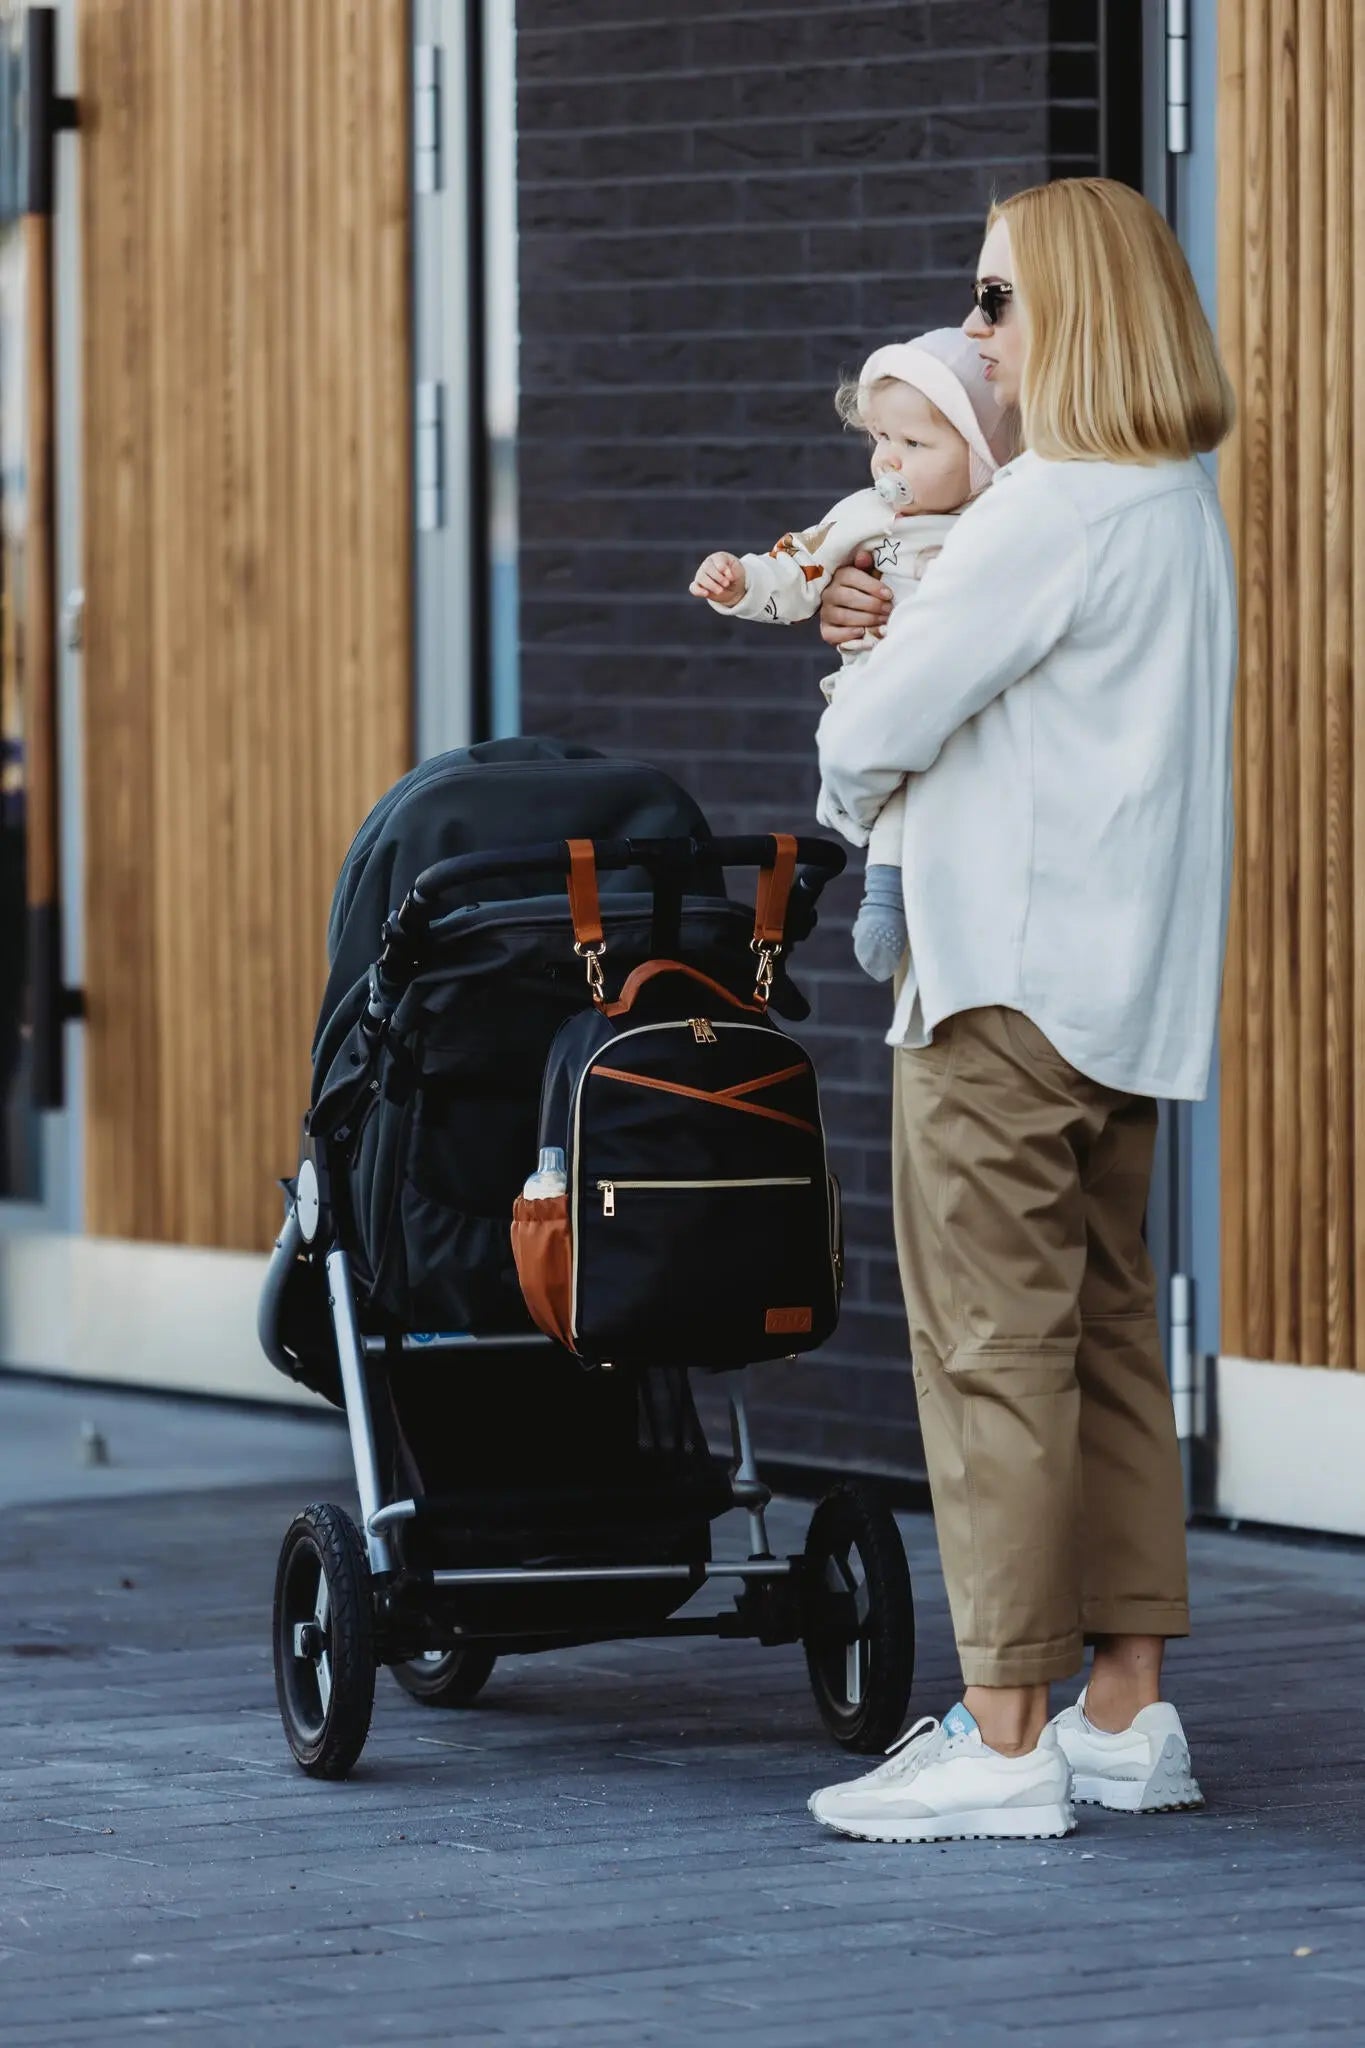 A woman holds a baby near a black and brown backpack on a stroller. Small Diaper Backpack – Black Coffee by Ally Scandic, designed for style, organization, and convenience on the go.